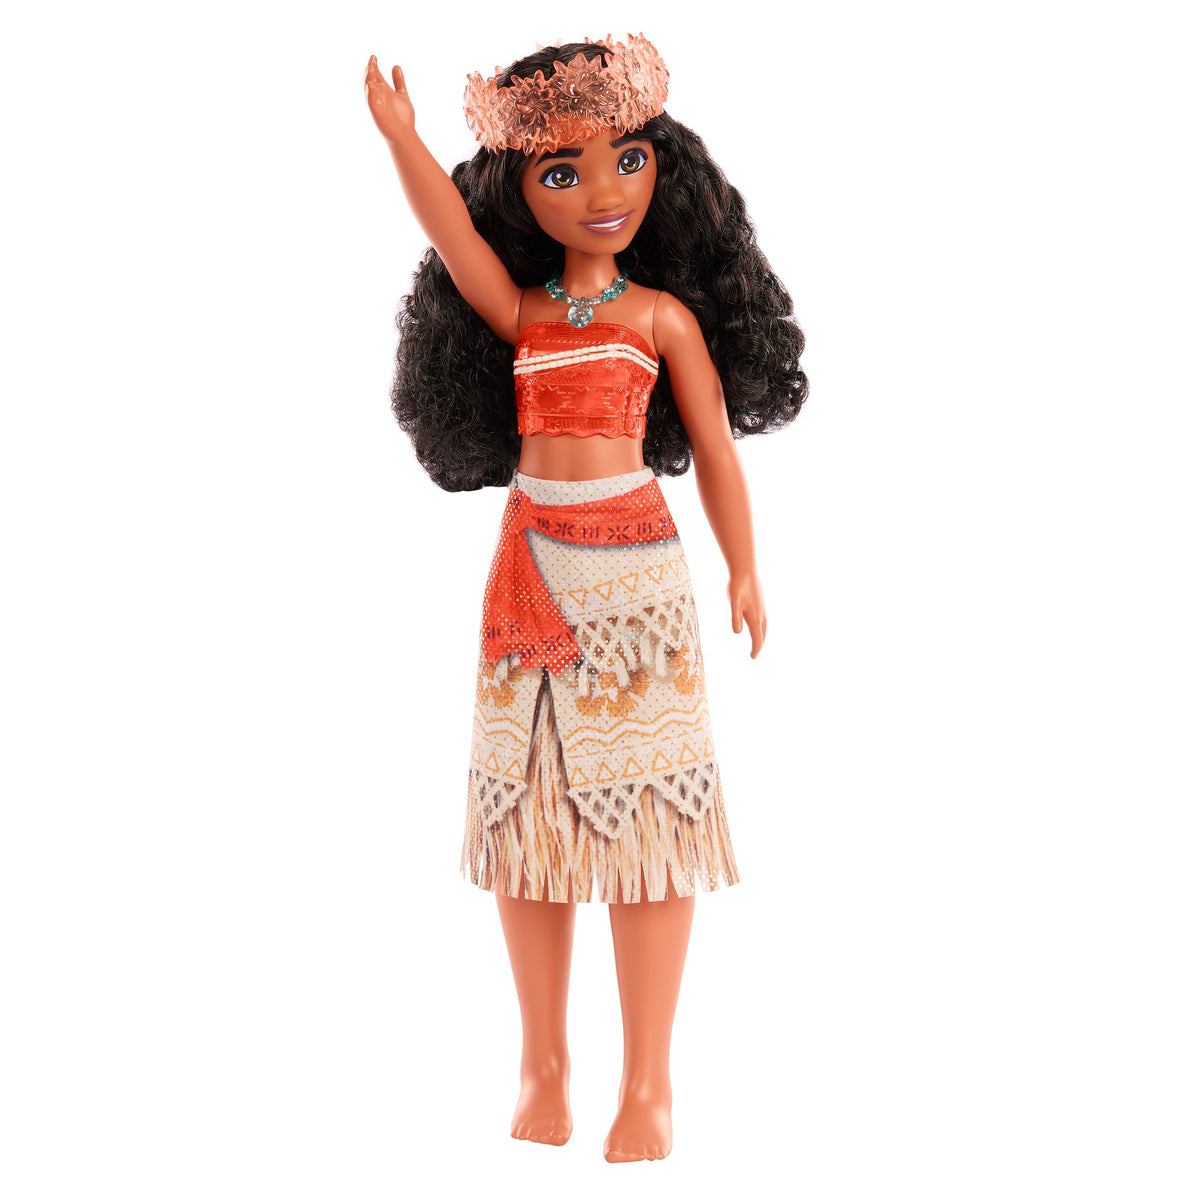 Disney Princess Moana Posable Fashion Doll with Sparkling Clothing and Accessories for Kids Ages 3+